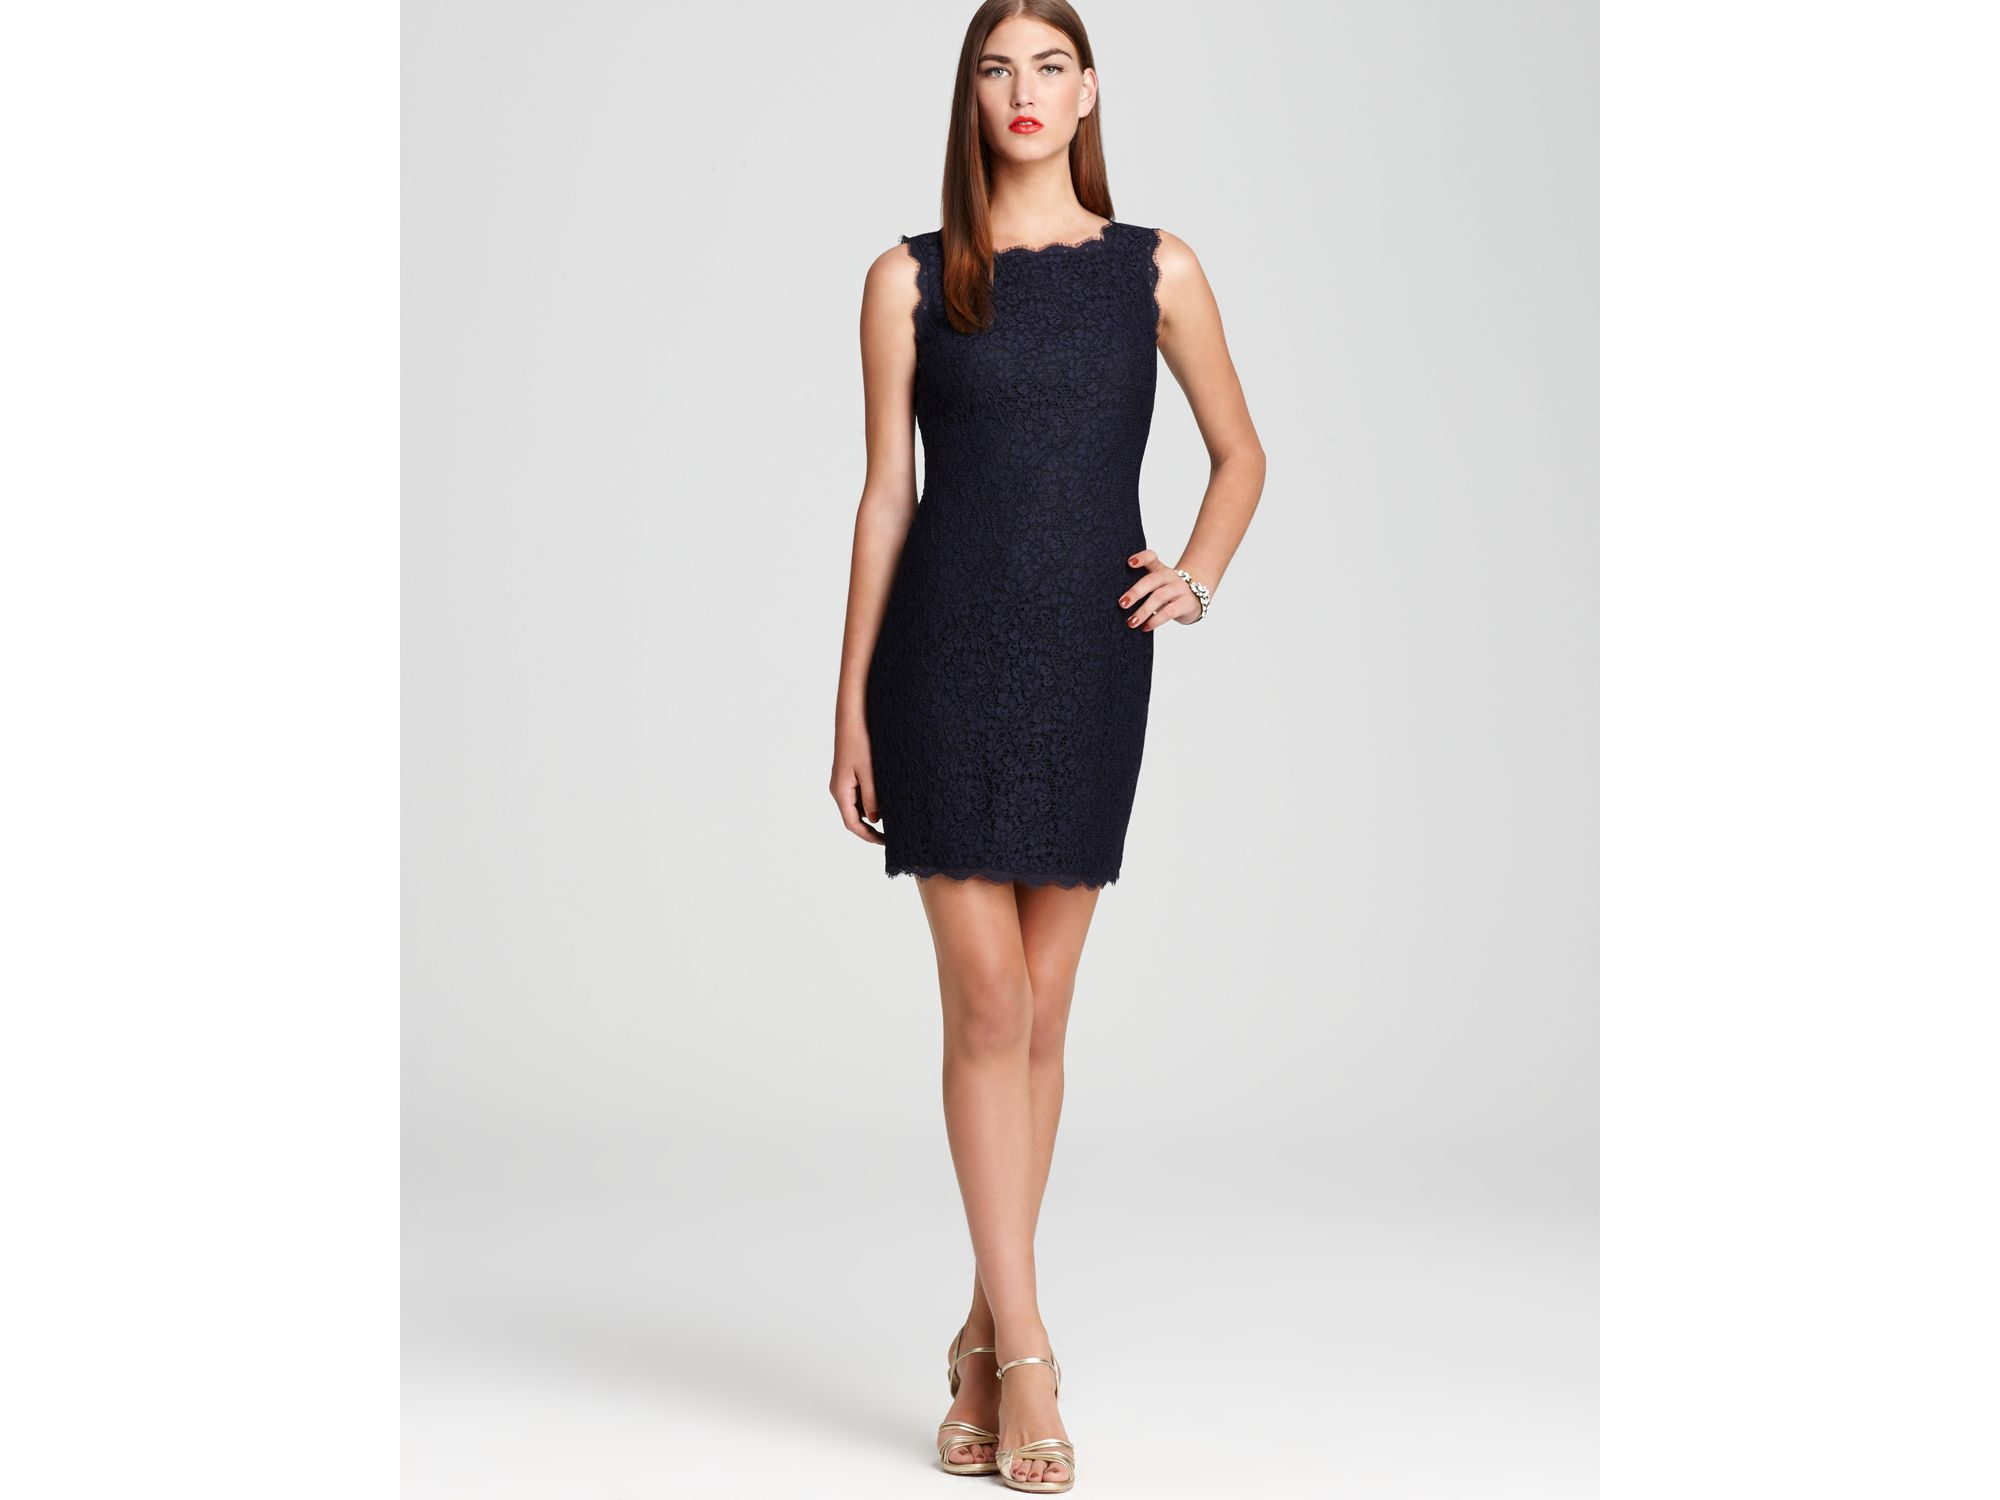 Adrianna Papell Lace Dress - Sleeveless Square Neck Short in Blue - Lyst2000 x 1500